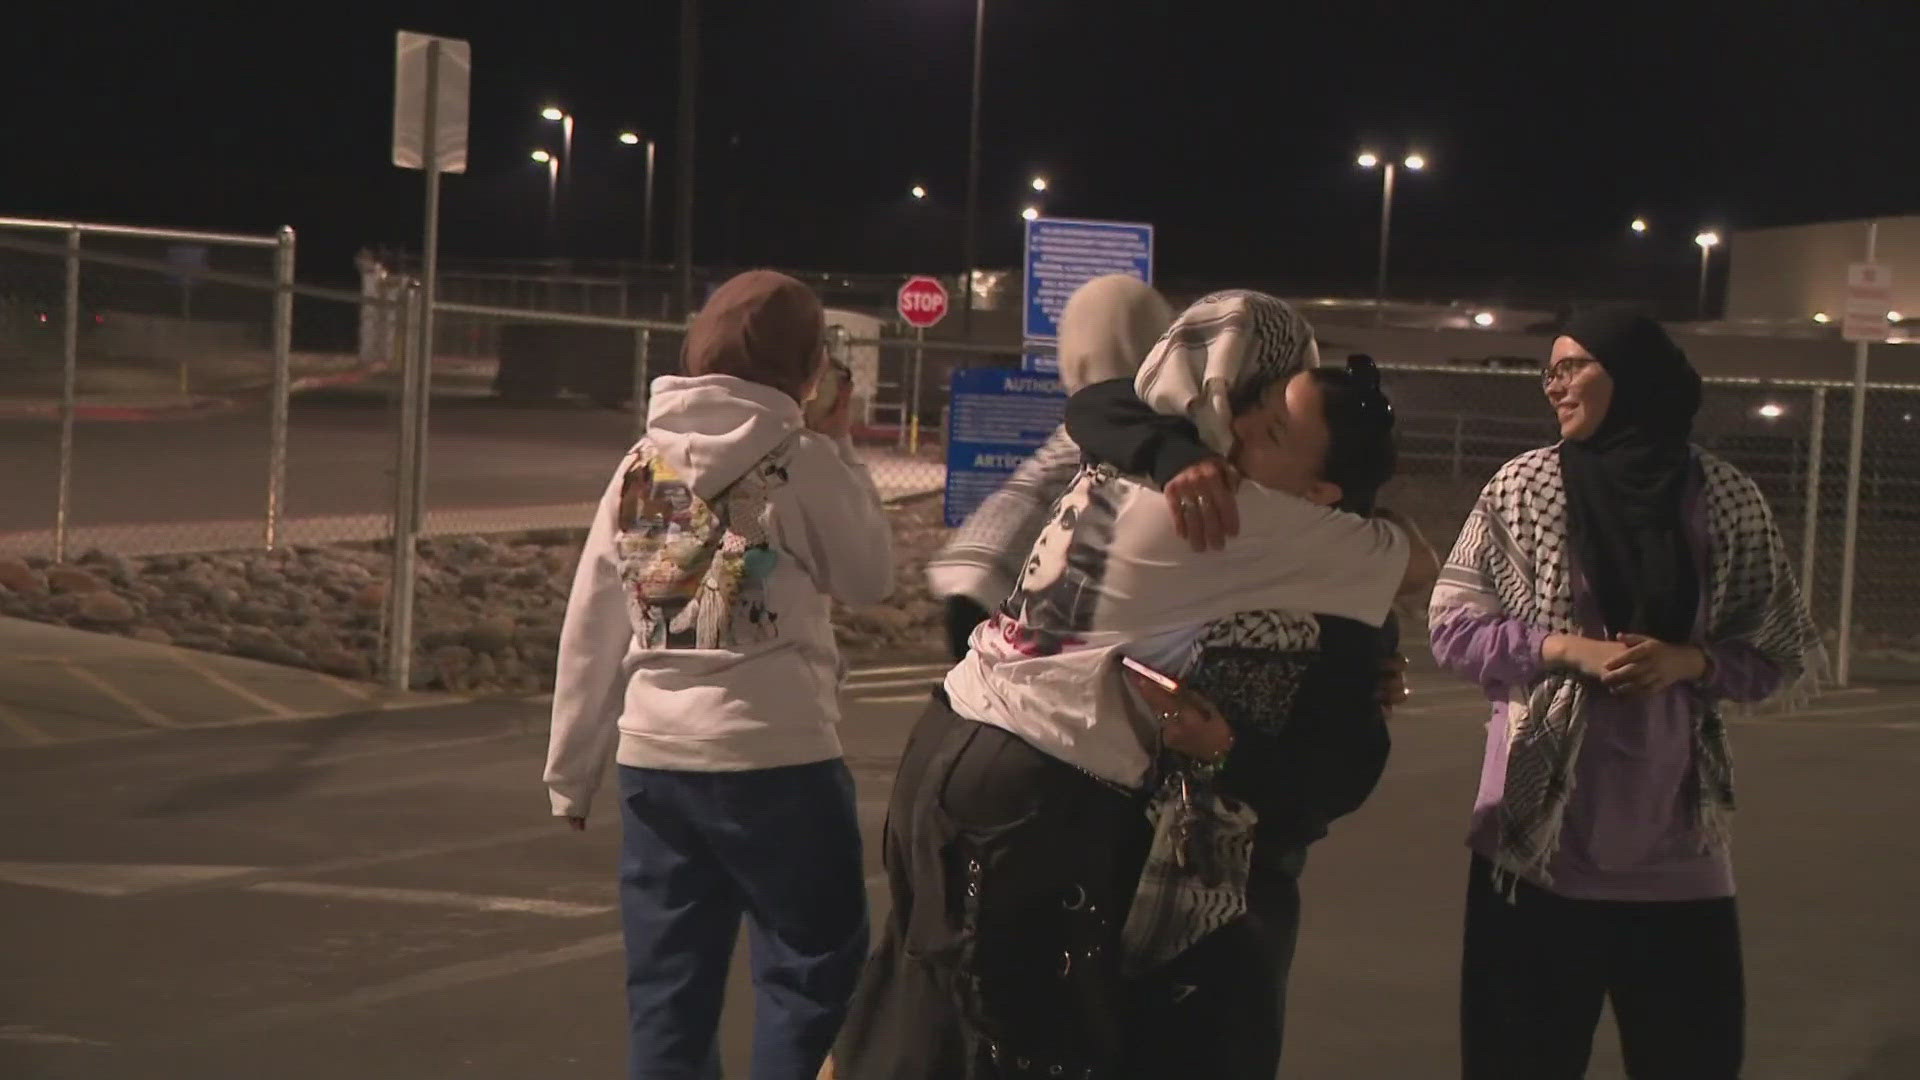 Pro-Palestinian protesters who were arrested after a night of unrest at ASU were released from jail on Saturday and 12News was there.